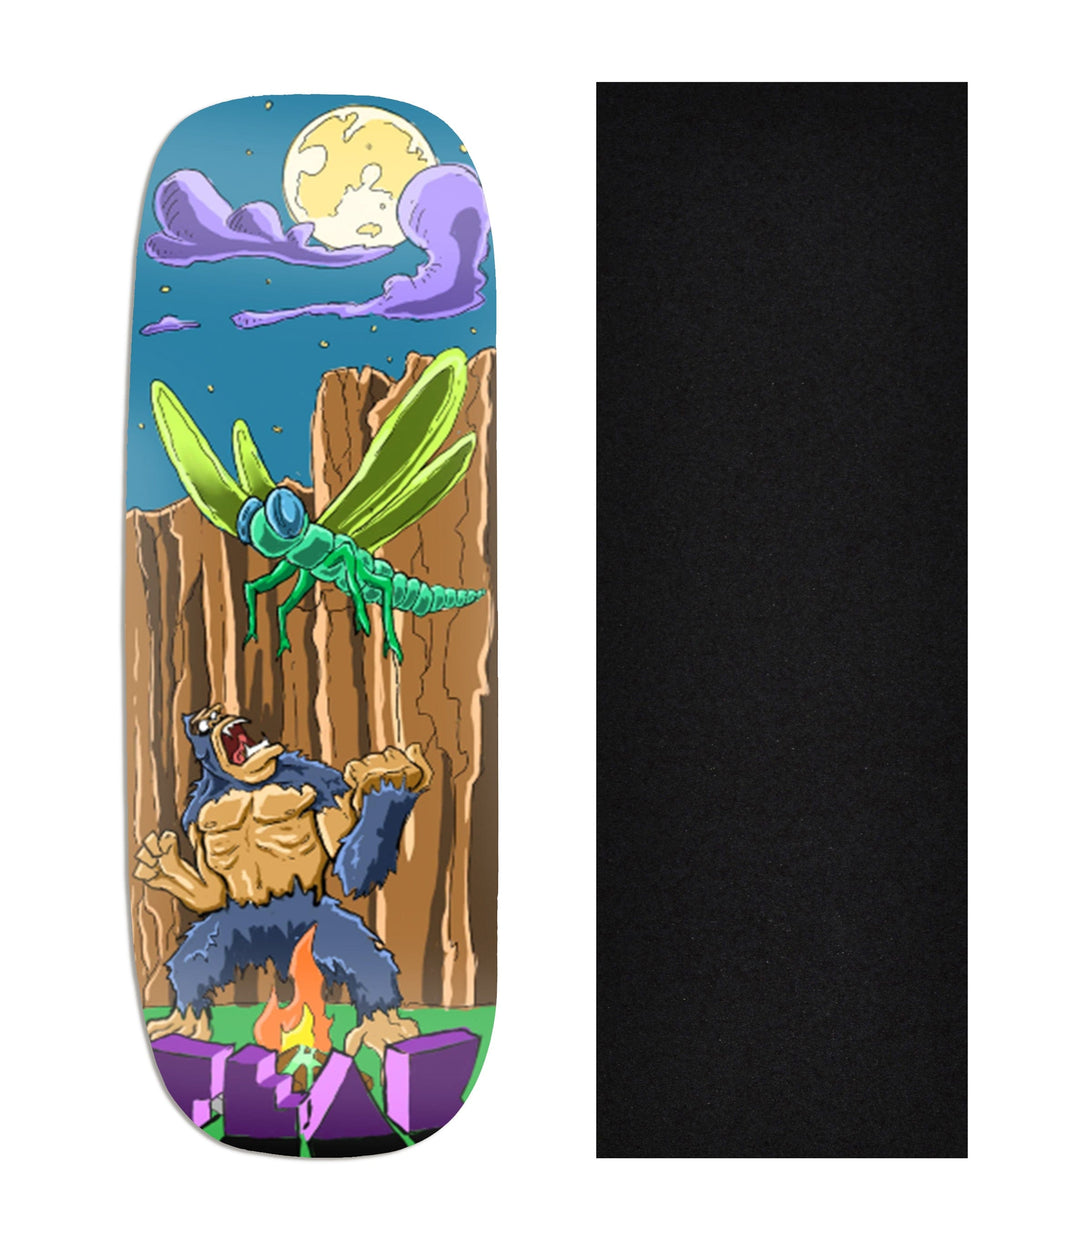 Teak Tuning Heat Transfer Graphic Wooden Fingerboard Deck, "Angry Ape" Boxy Deck